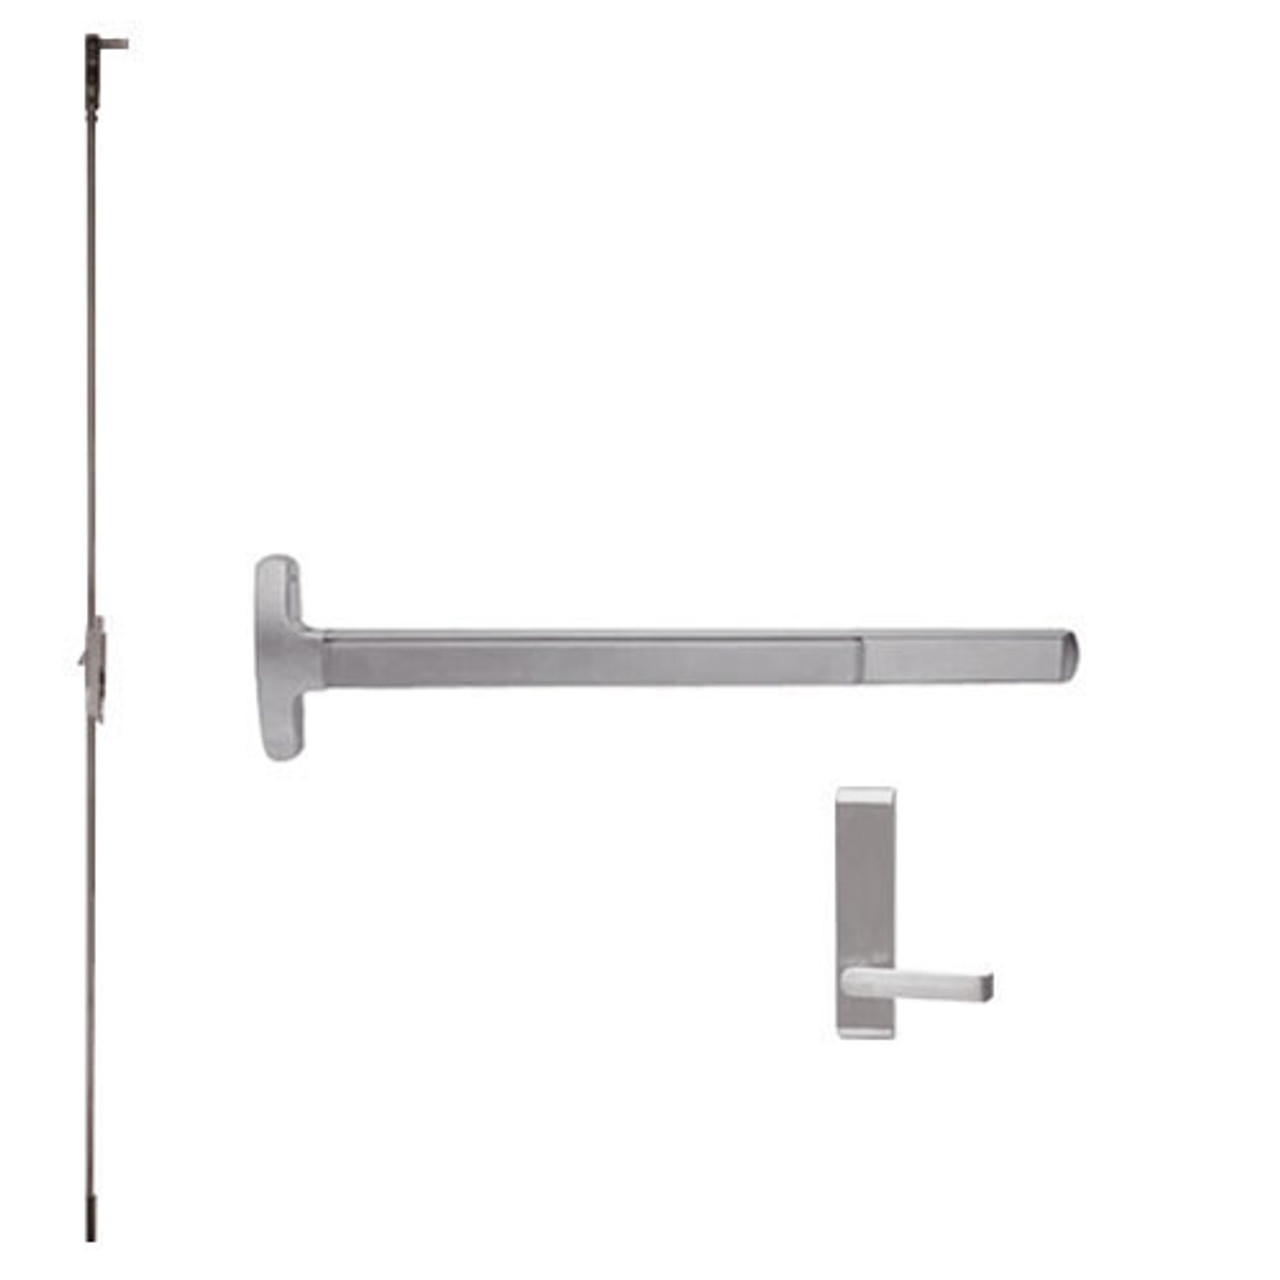 F-24-C-L-DT-DANE-US32D-4-LHR Falcon Exit Device in Satin Stainless Steel